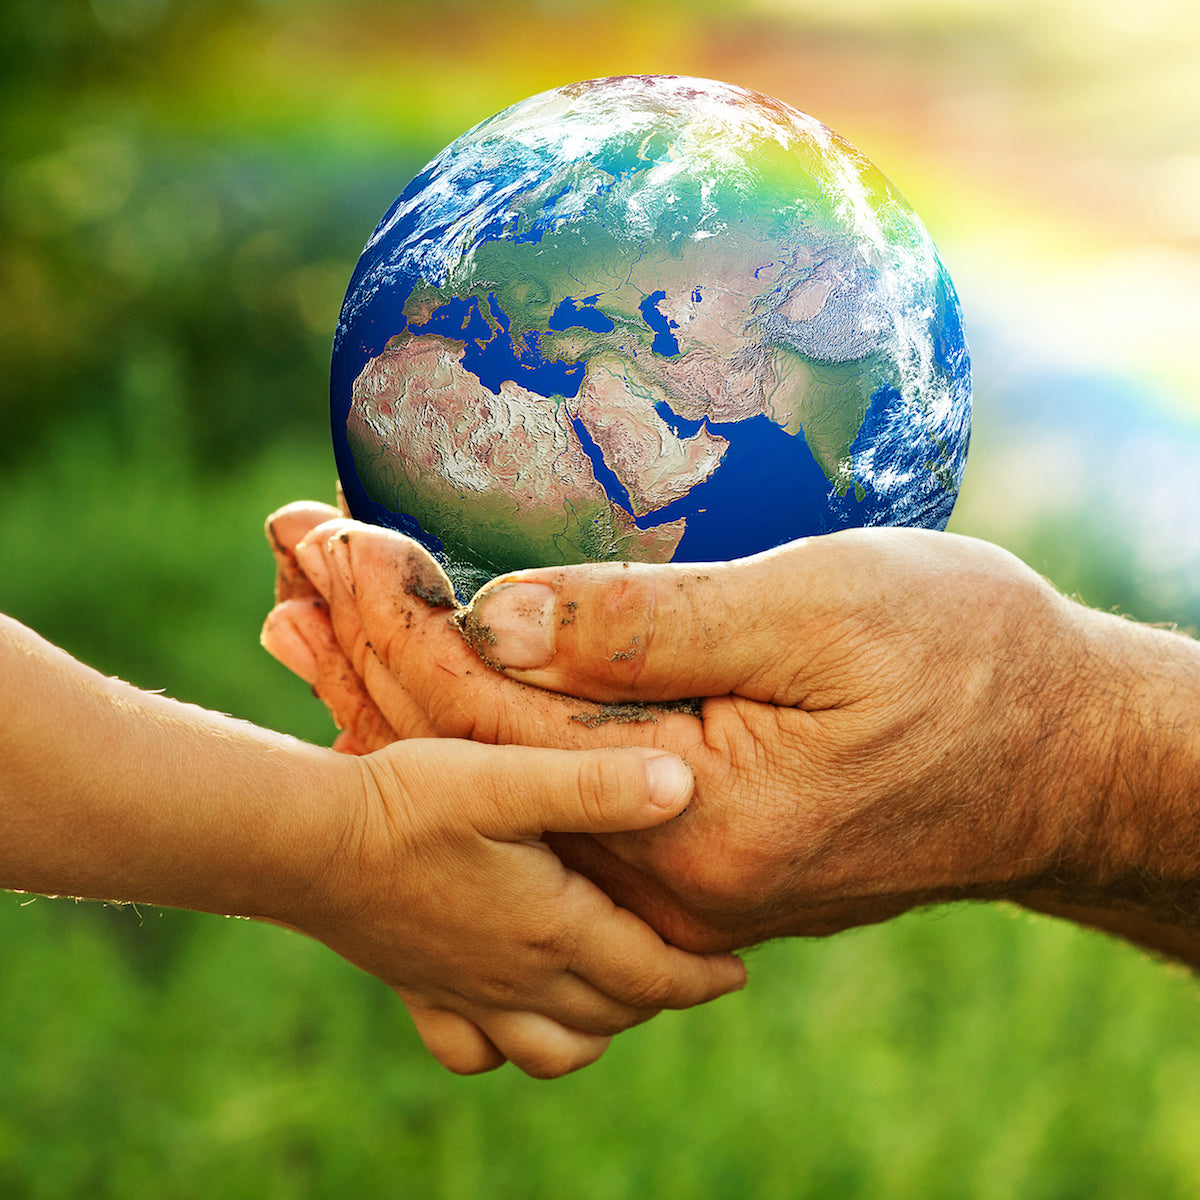 Child and adult hands holding our planet -  Caring for Mother Earth